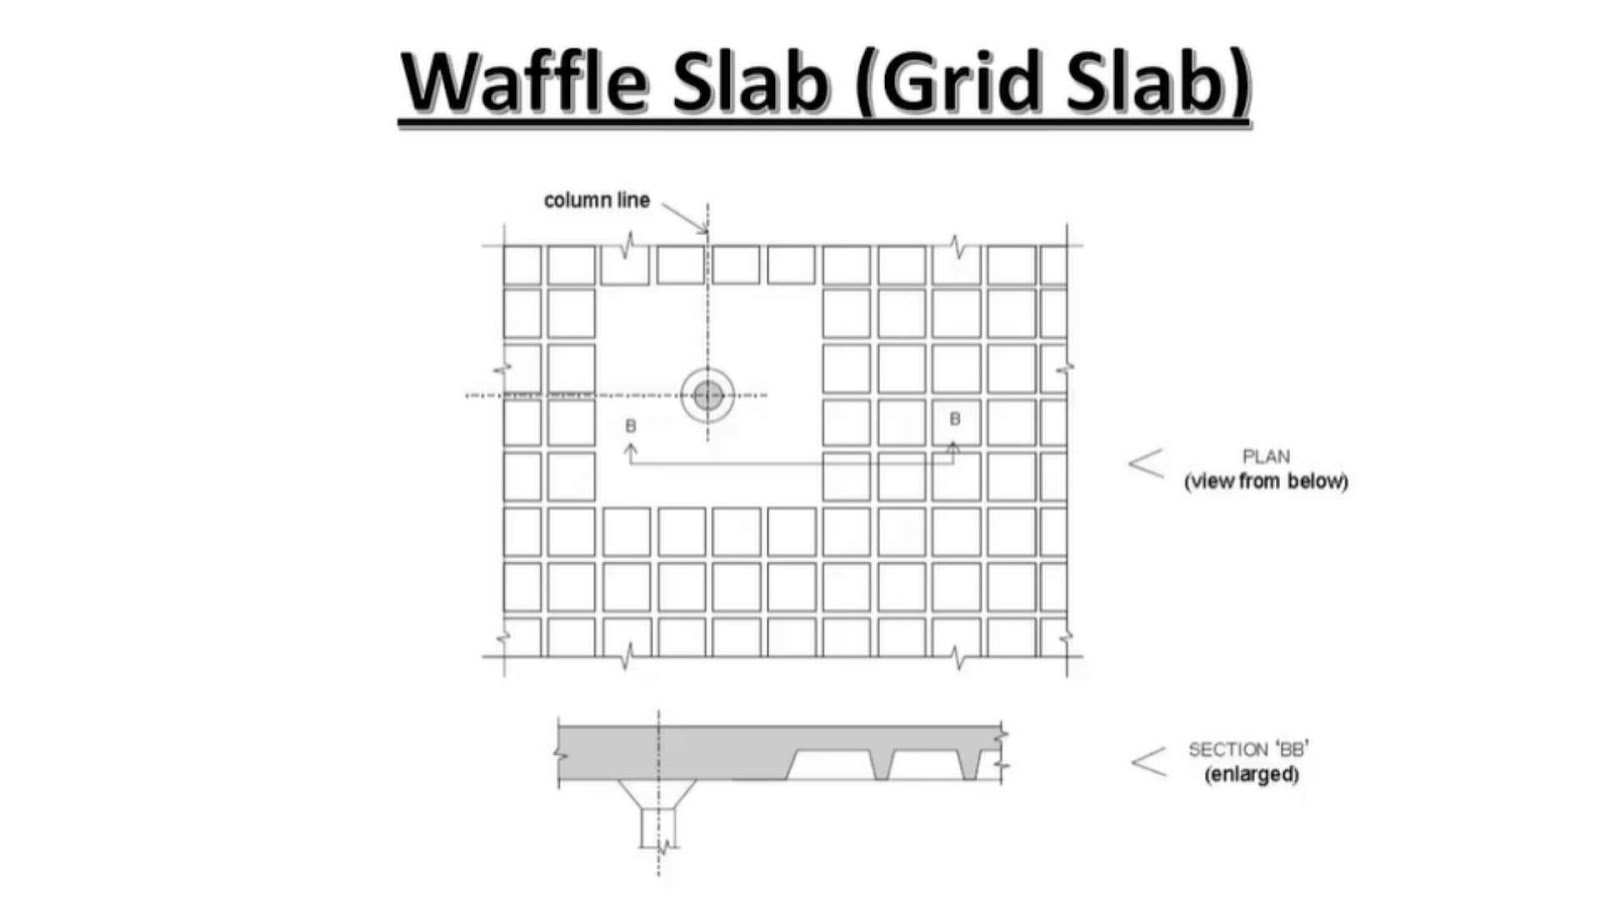 What is a Waffle slab?